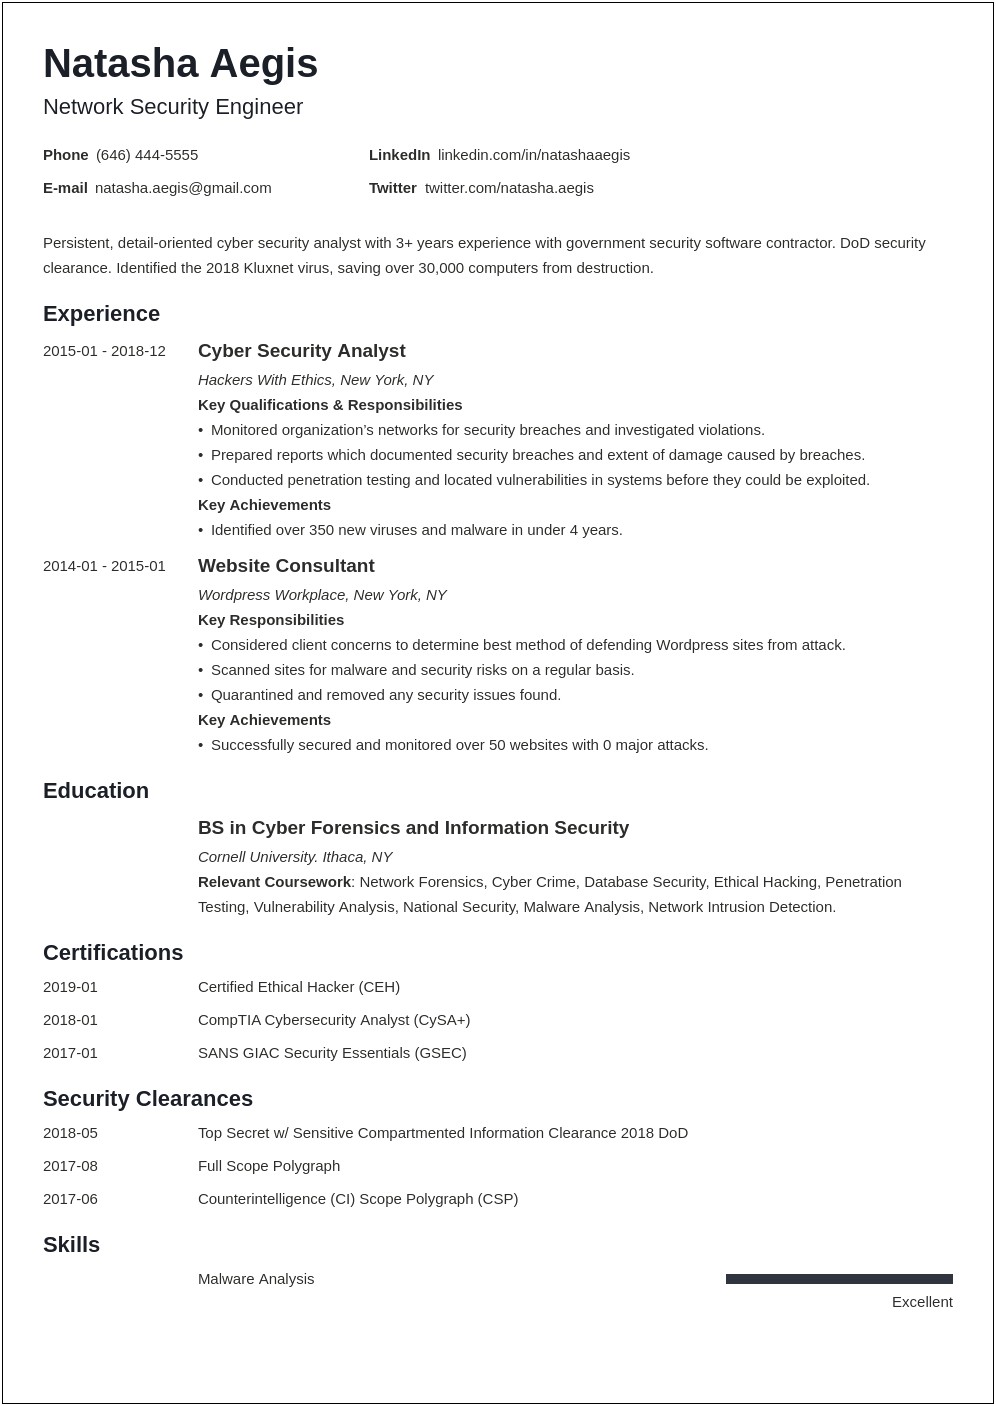 Sample Resume For Identity And Access Management